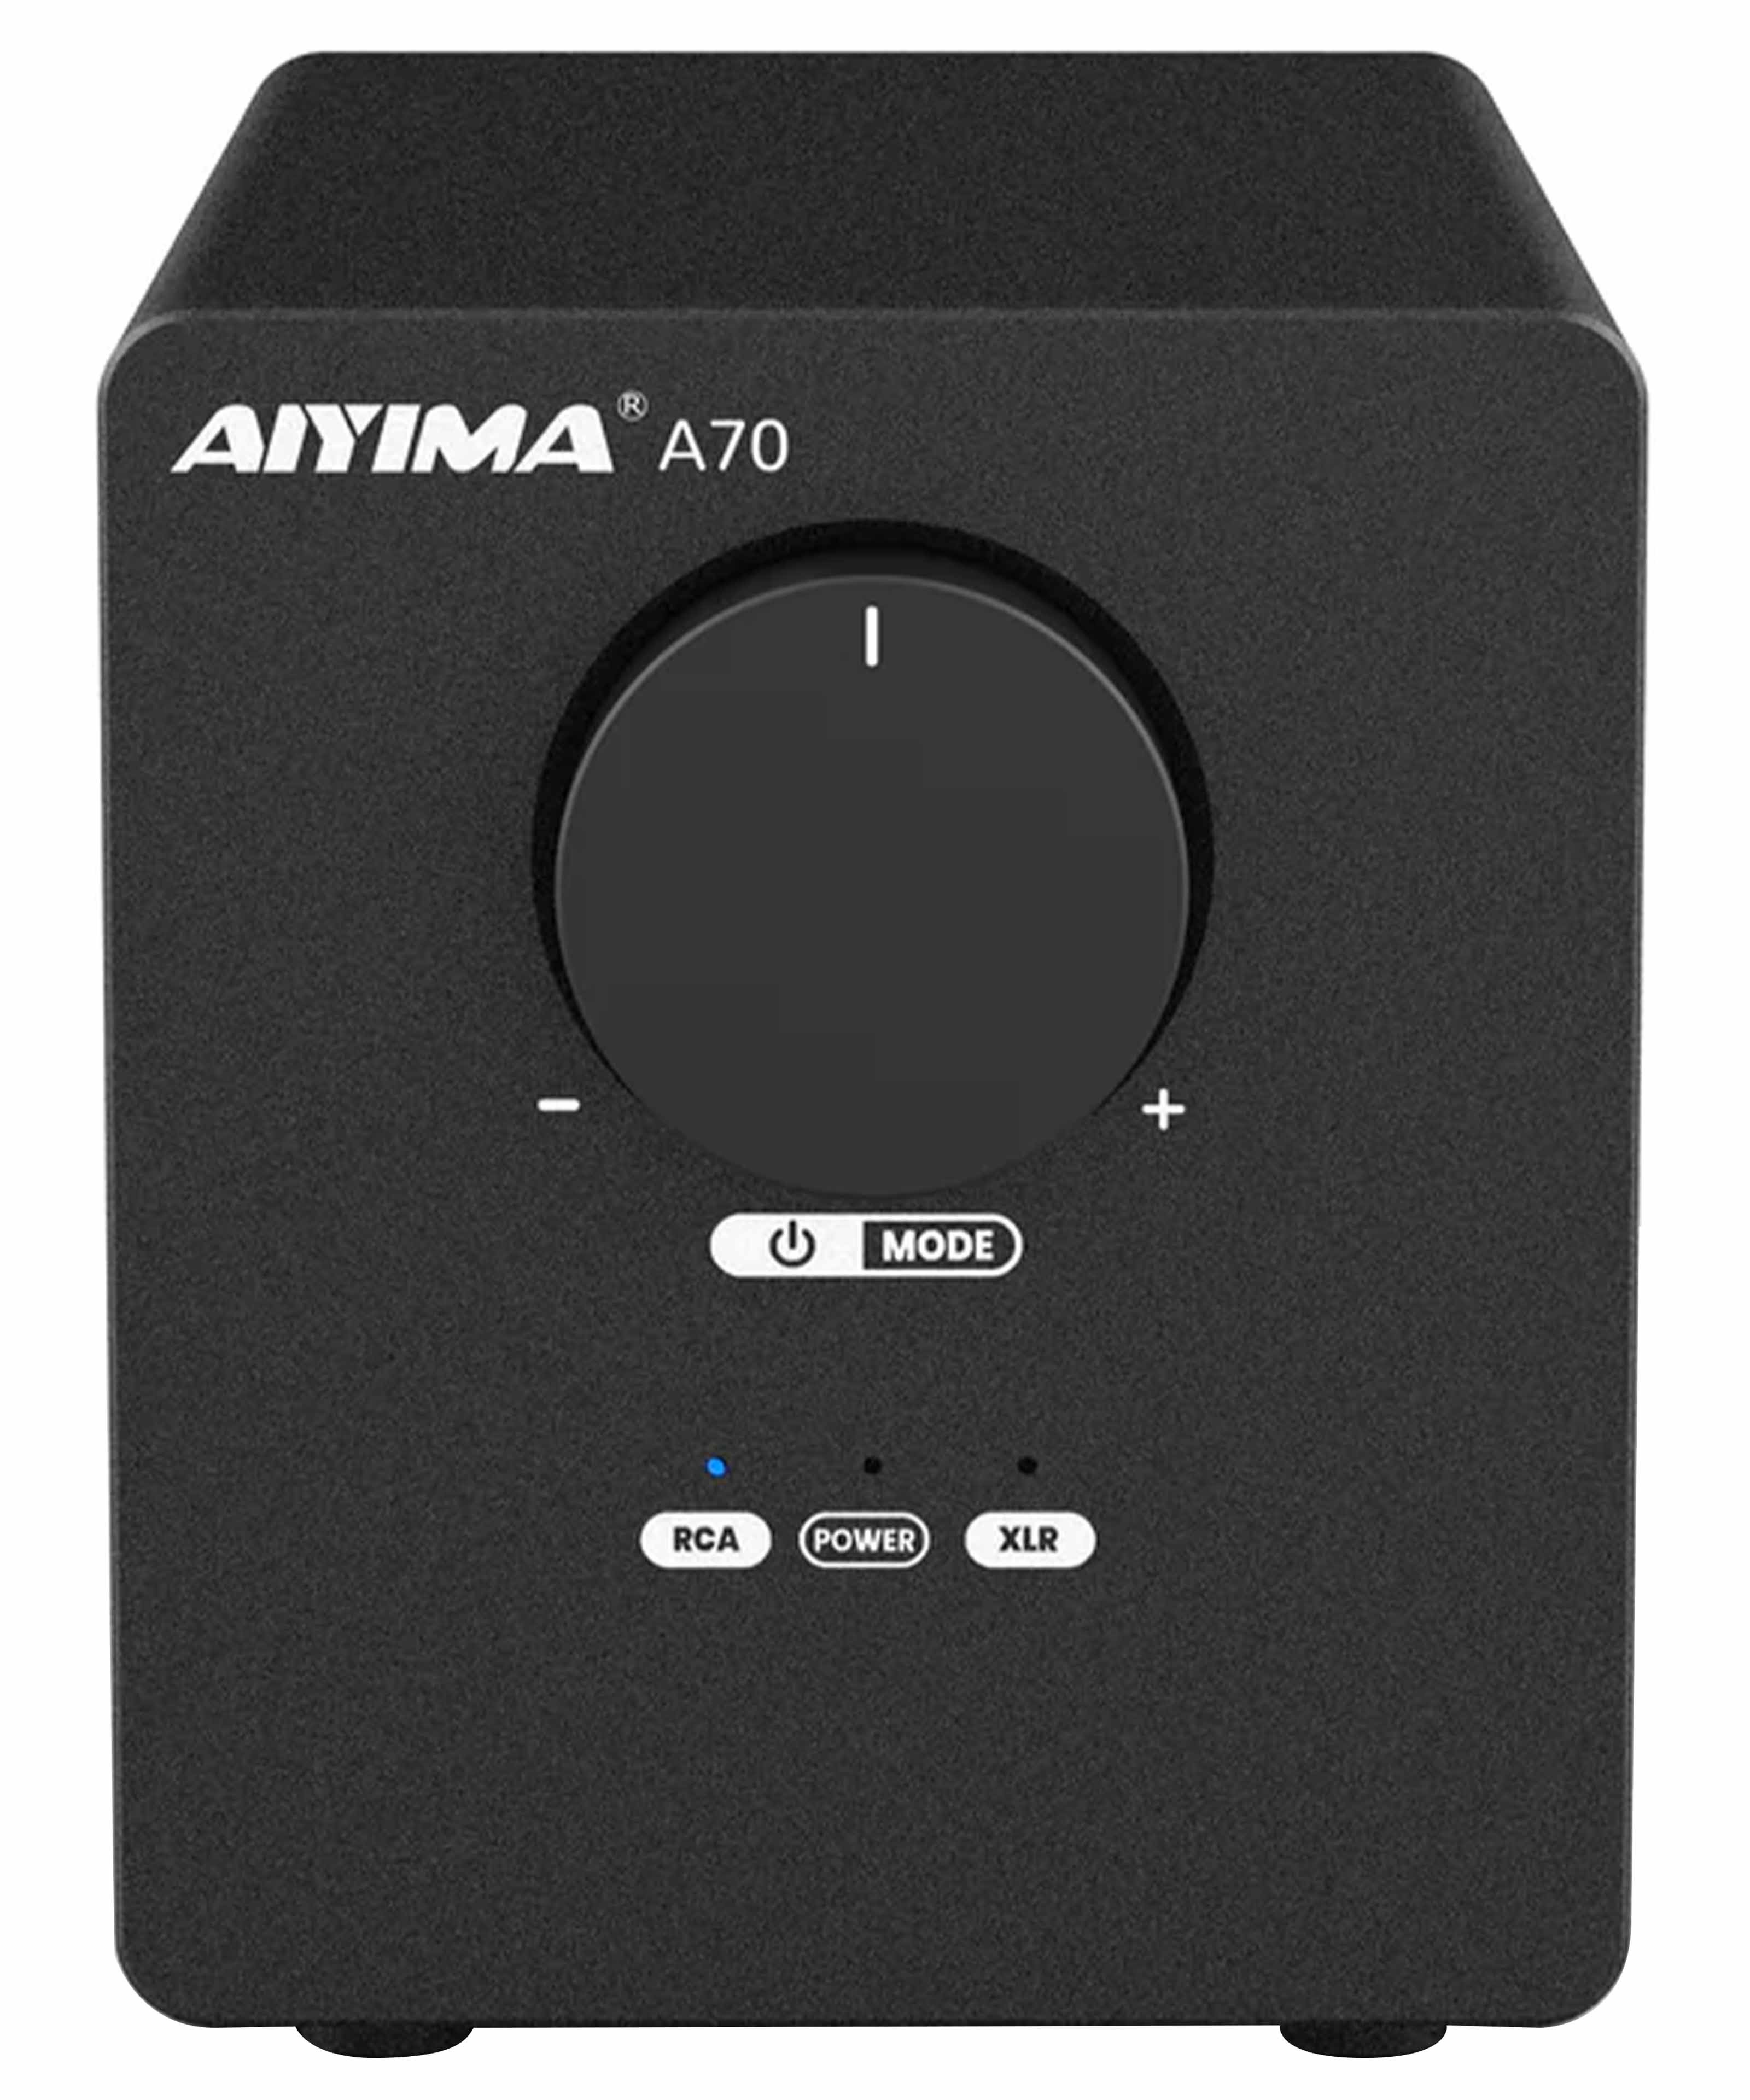 AIYIMA A70 Amplificateur 2.1 canaux TPA3255 2x185W 4 Ohm